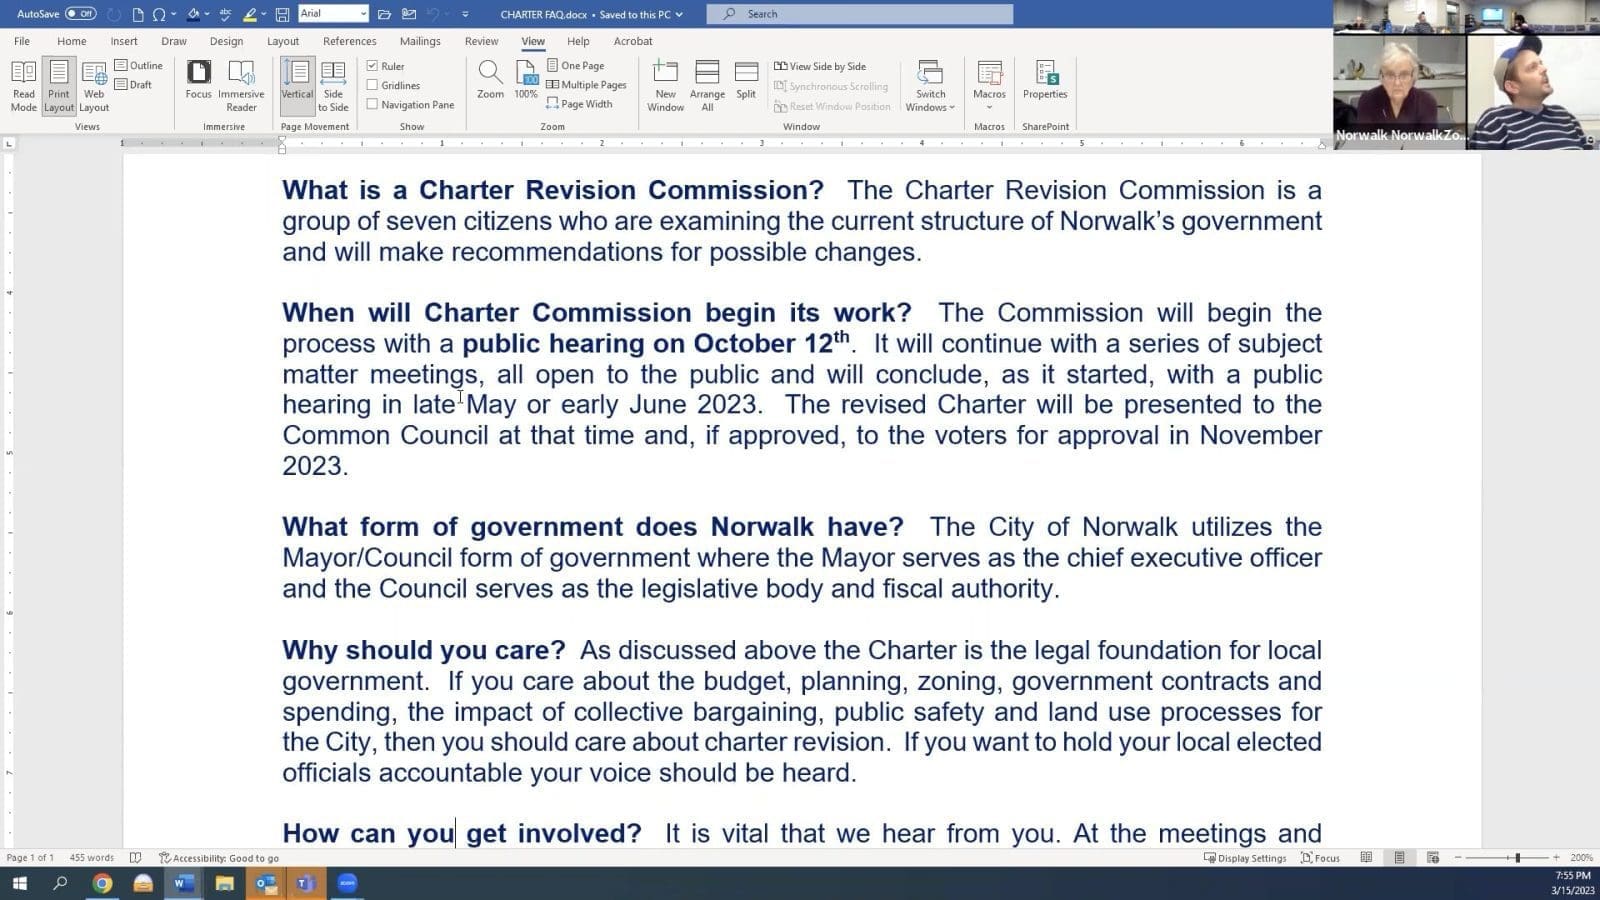 Norwalk Charter Revision Commission’s draft coming into focus